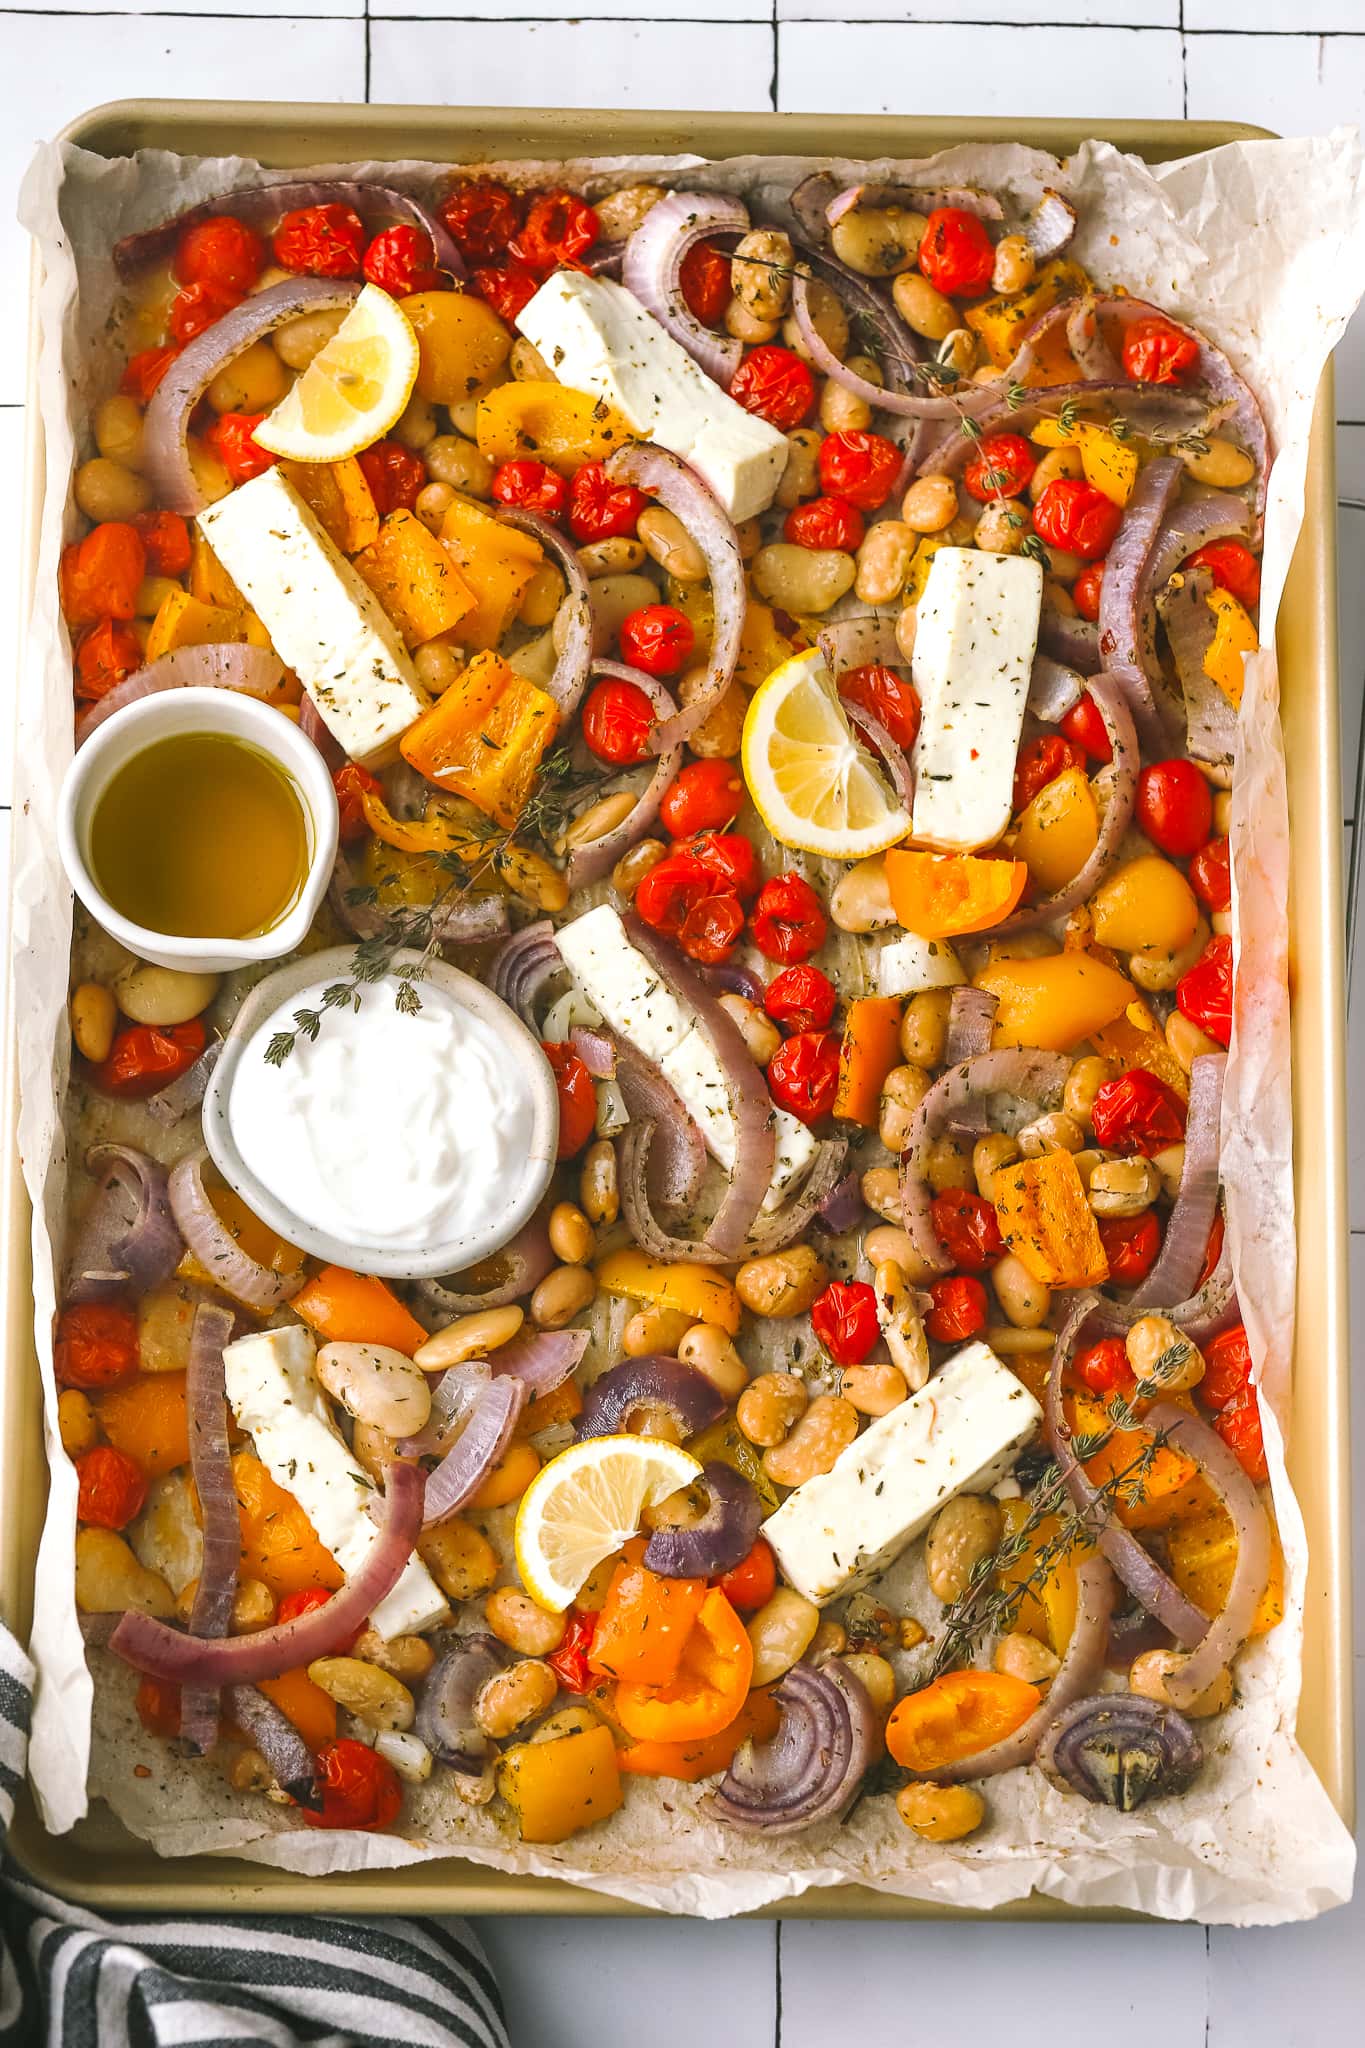 baked beans and vegetables with olive oil and yogurt